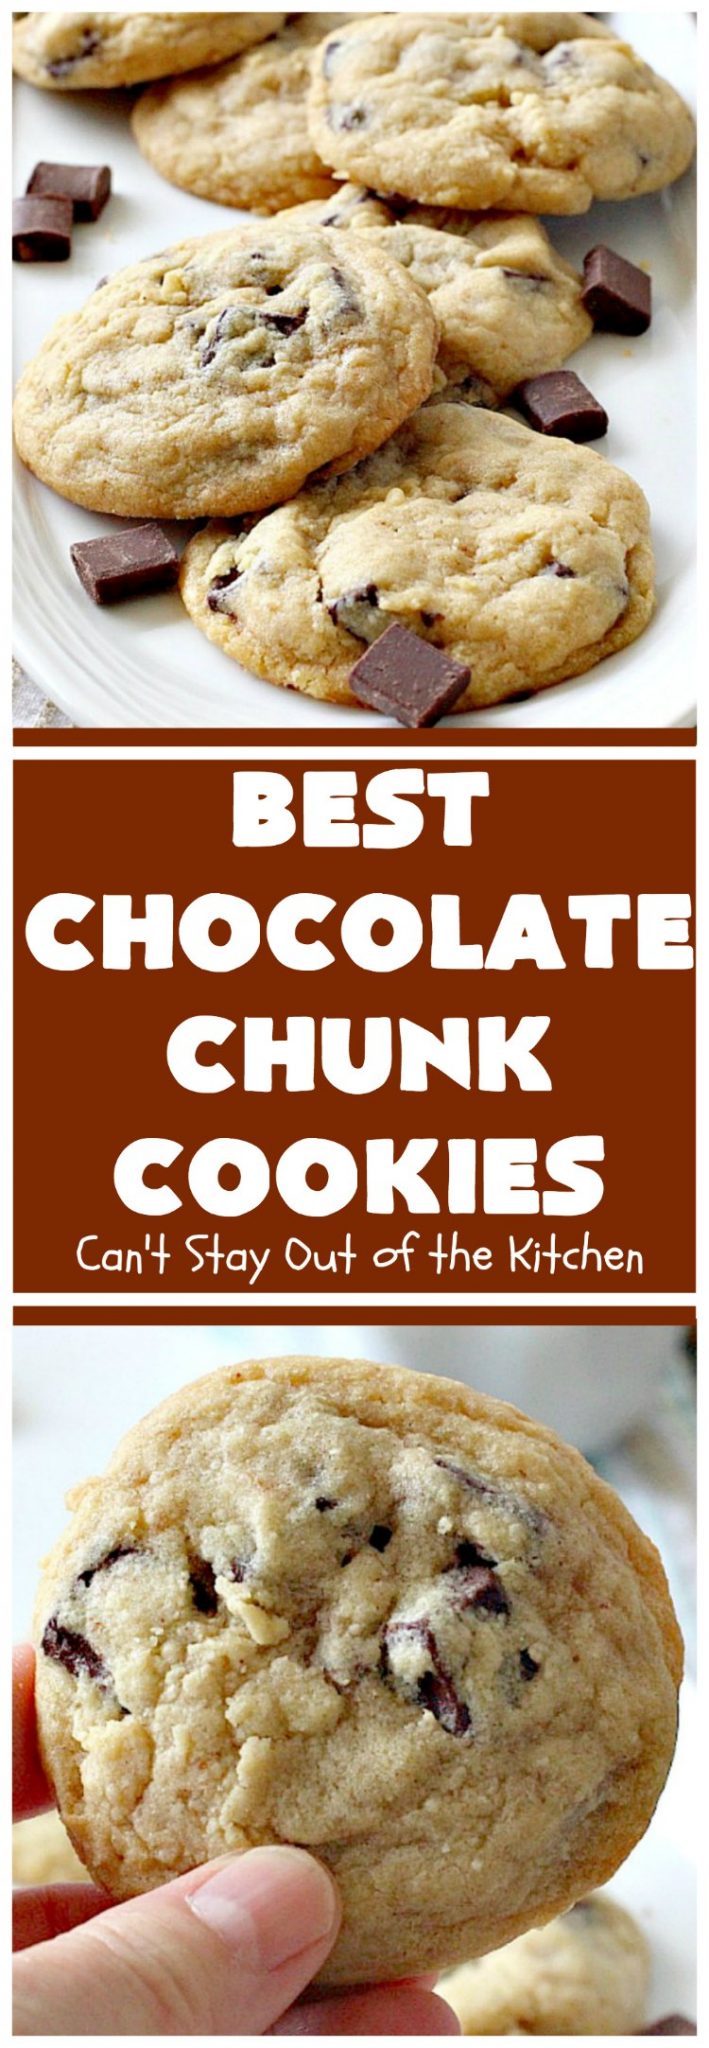 Best Chocolate Chunk Cookies – Can't Stay Out of the Kitchen